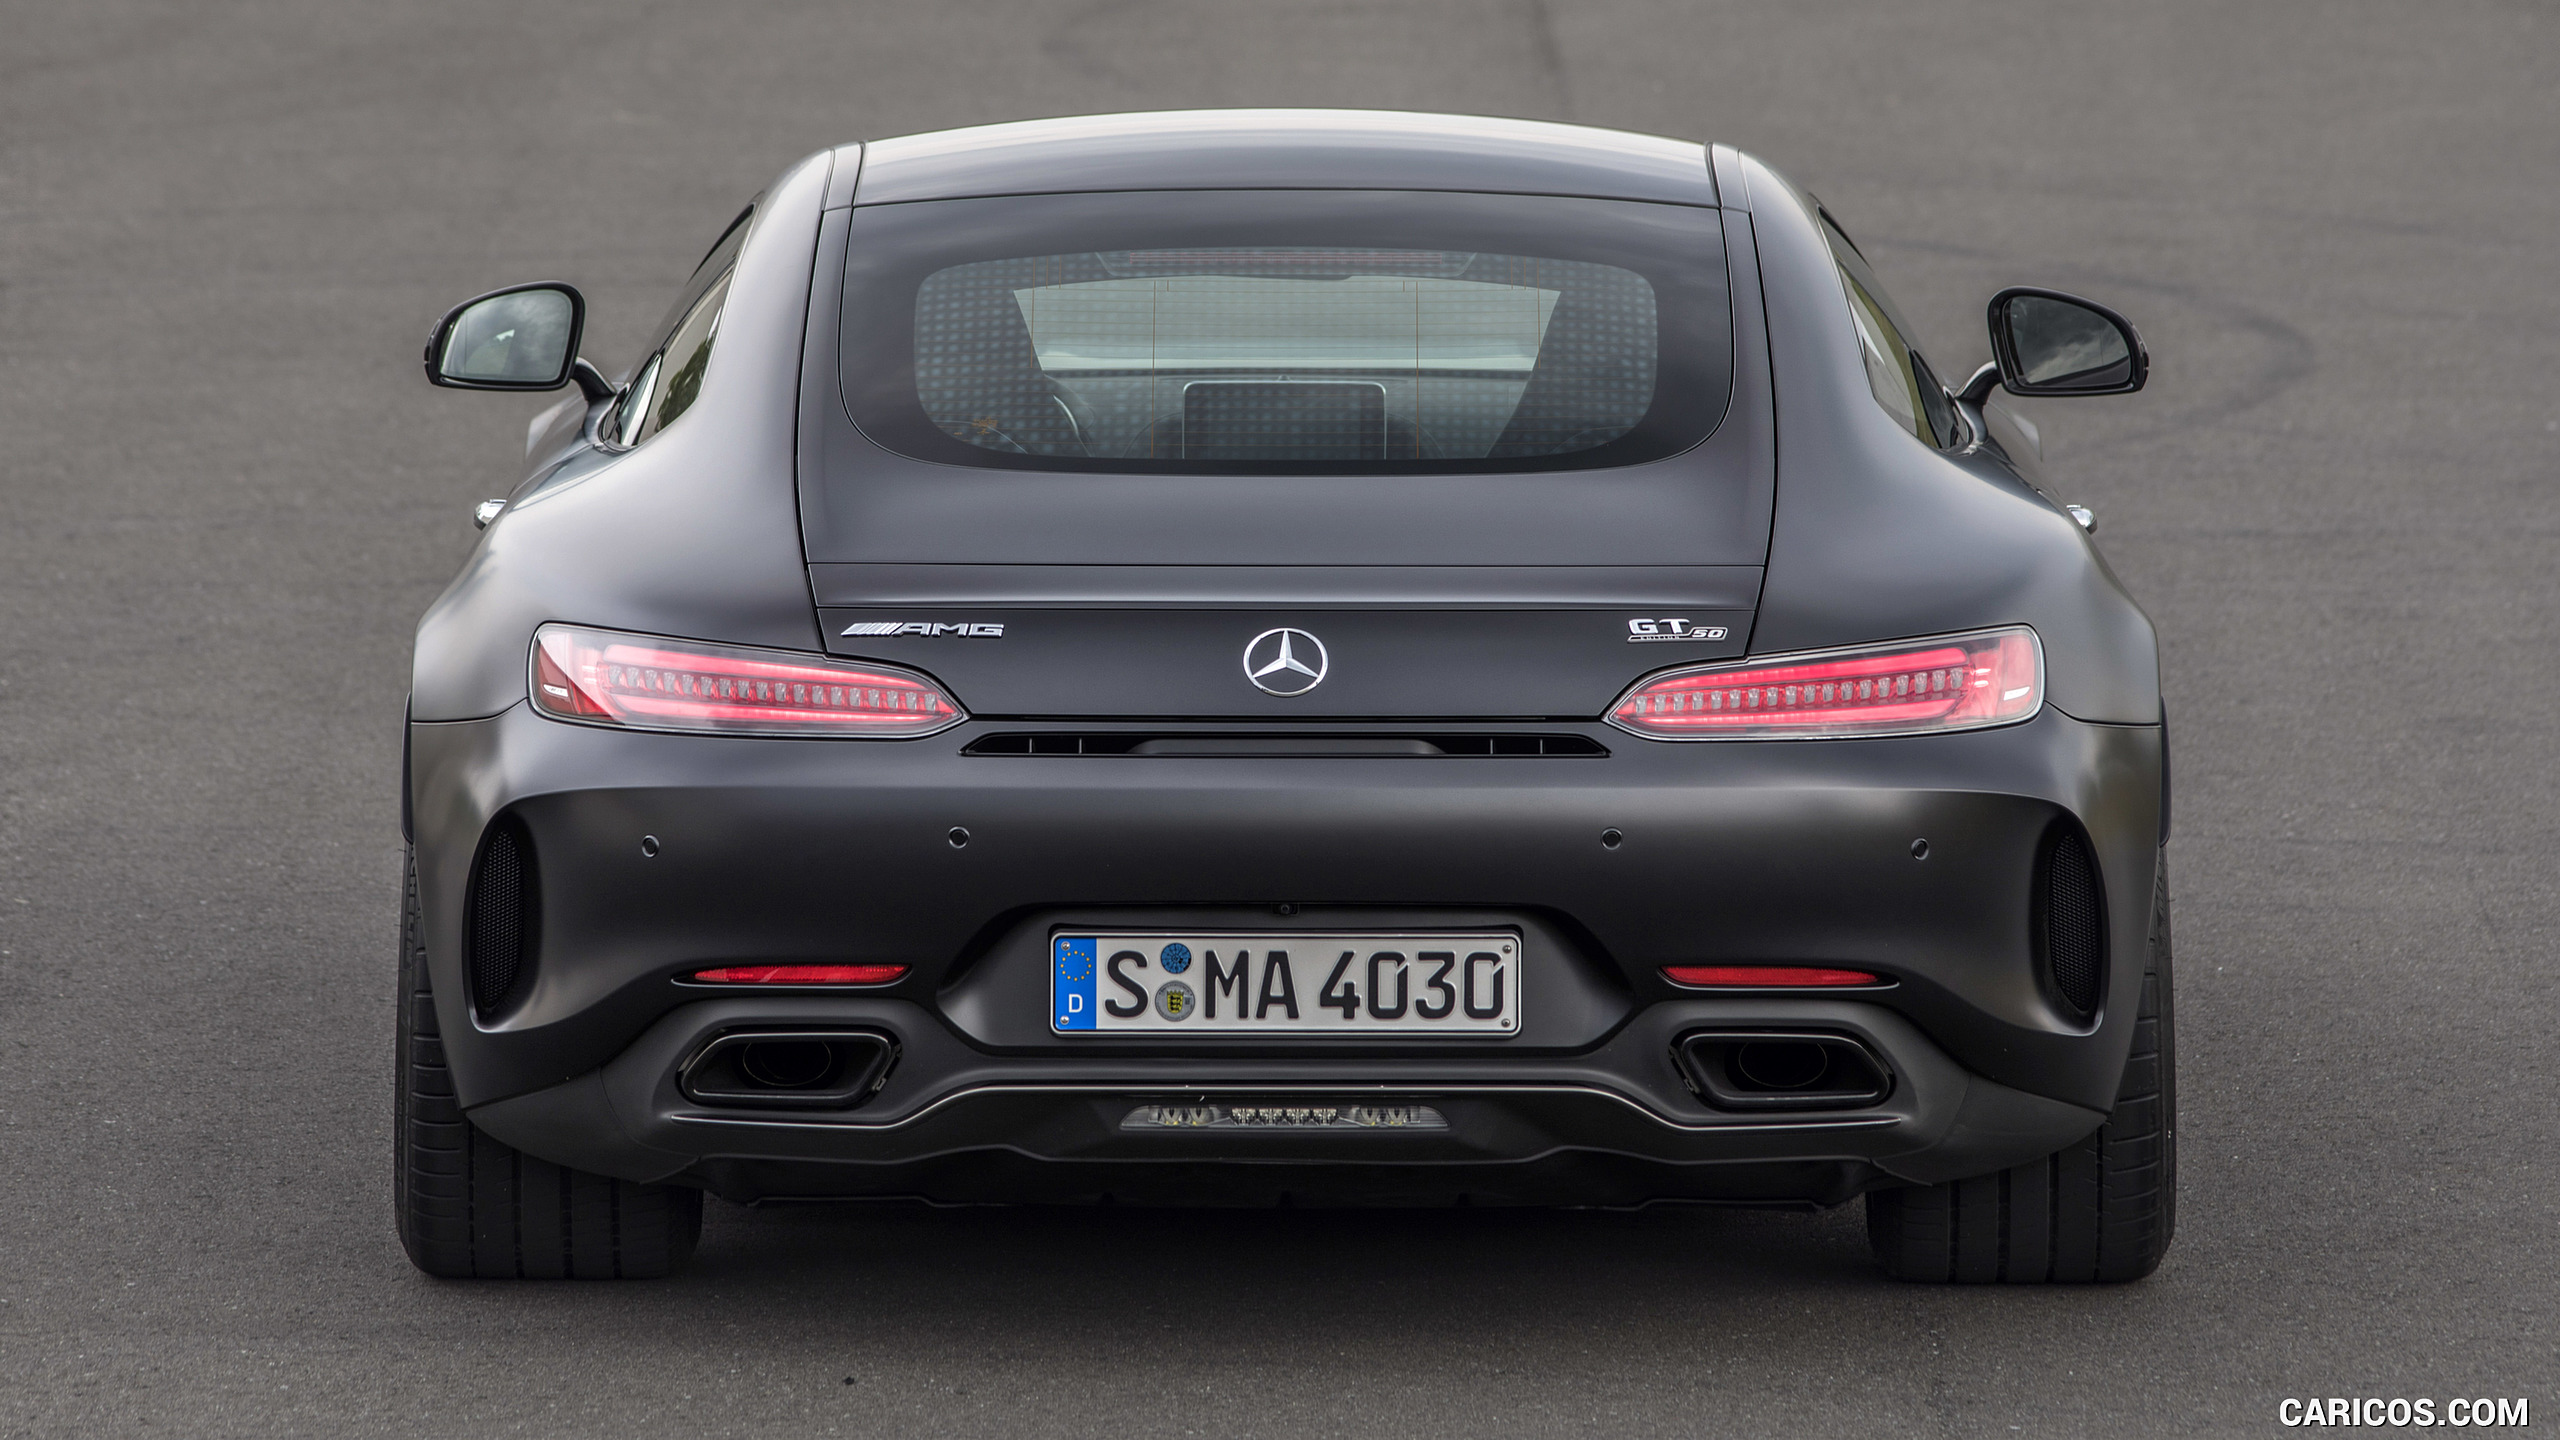 2018 Mercedes-AMG GT C Coupe Edition 50 - Rear, #36 of 70